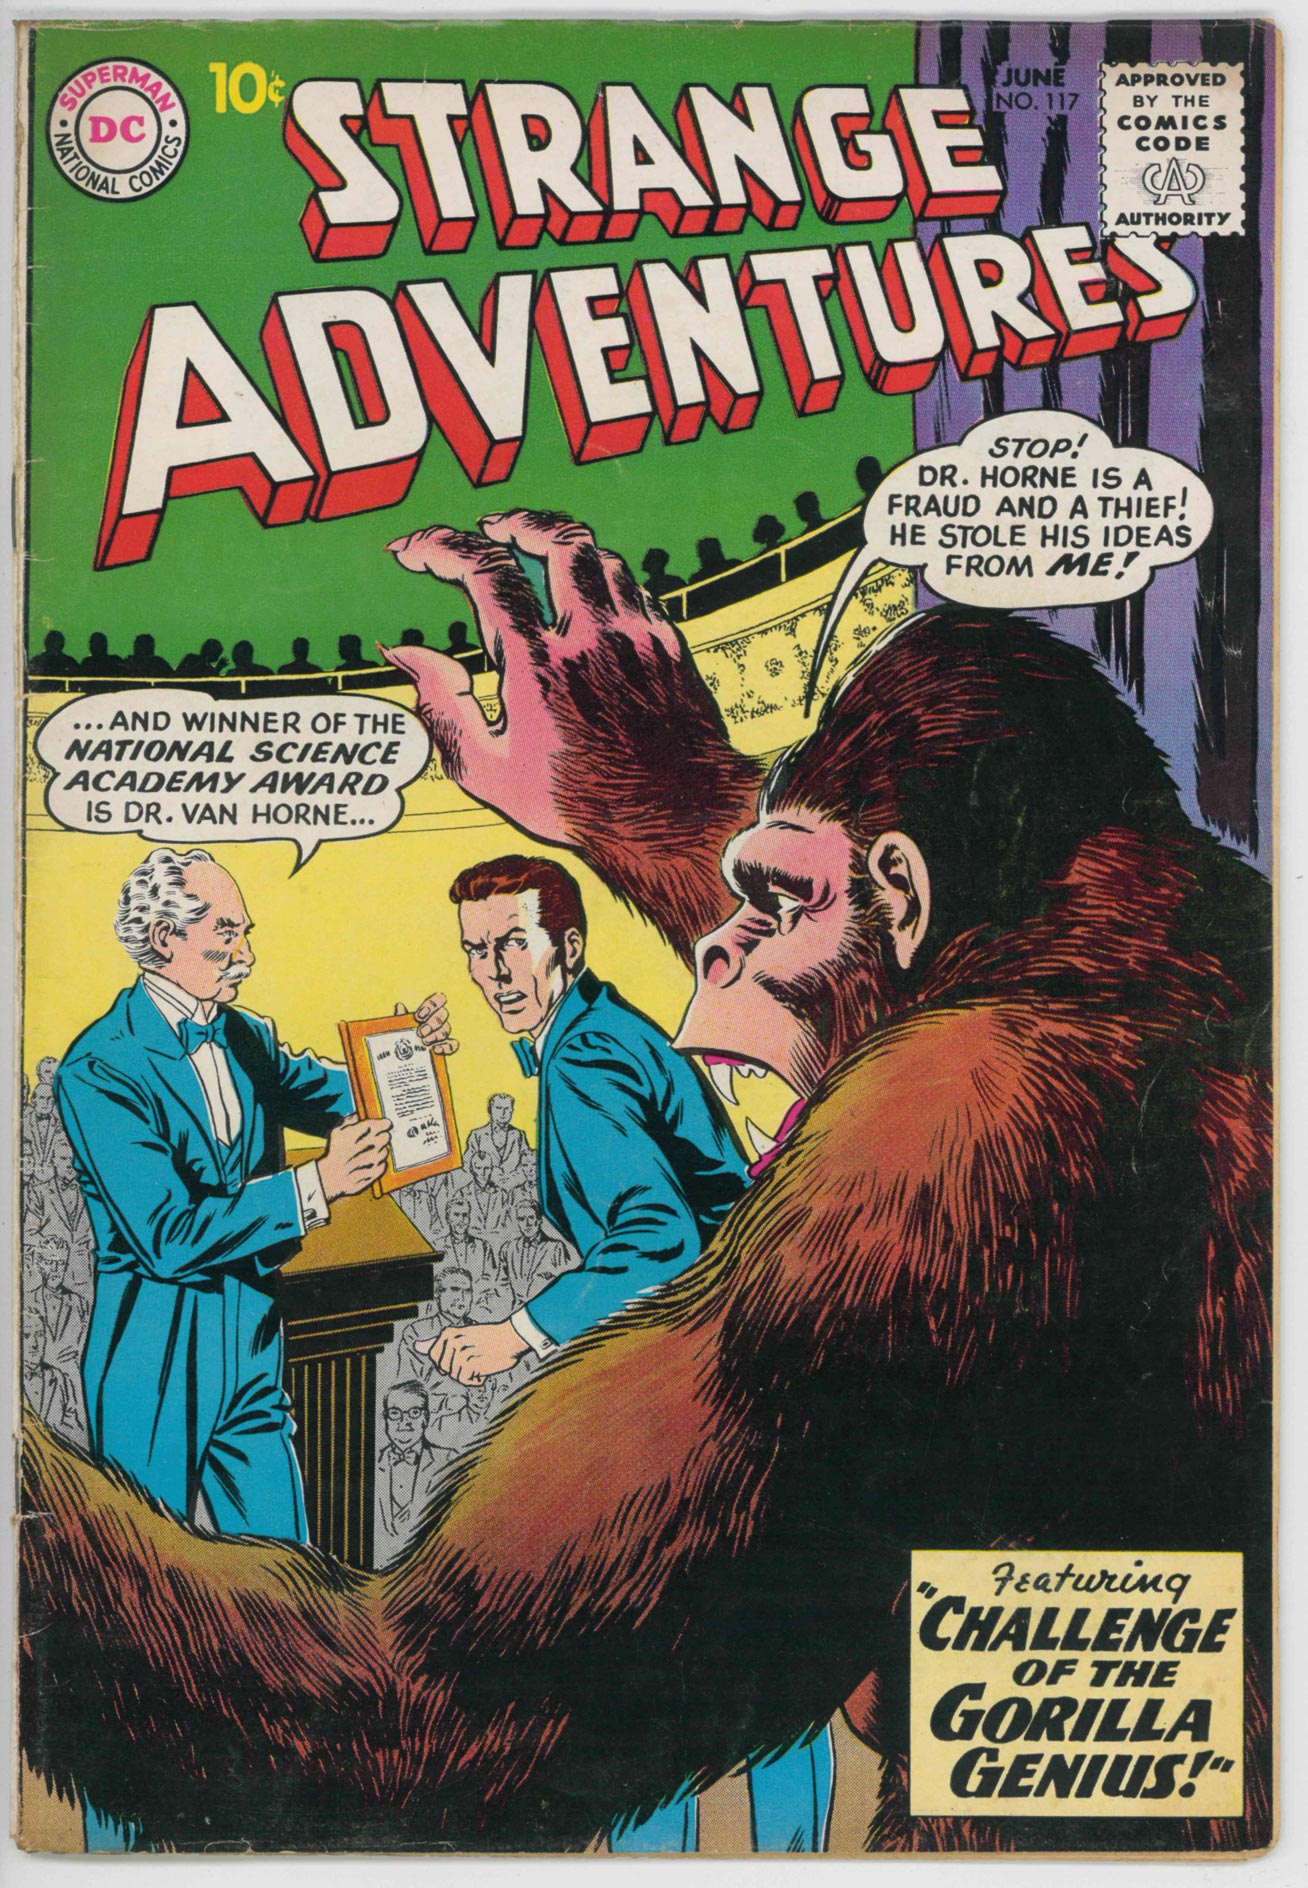 STRANGE ADVENTURES (1950) #117 (VG) - FIRST APPEARANCE ATOMIC KNIGHTS